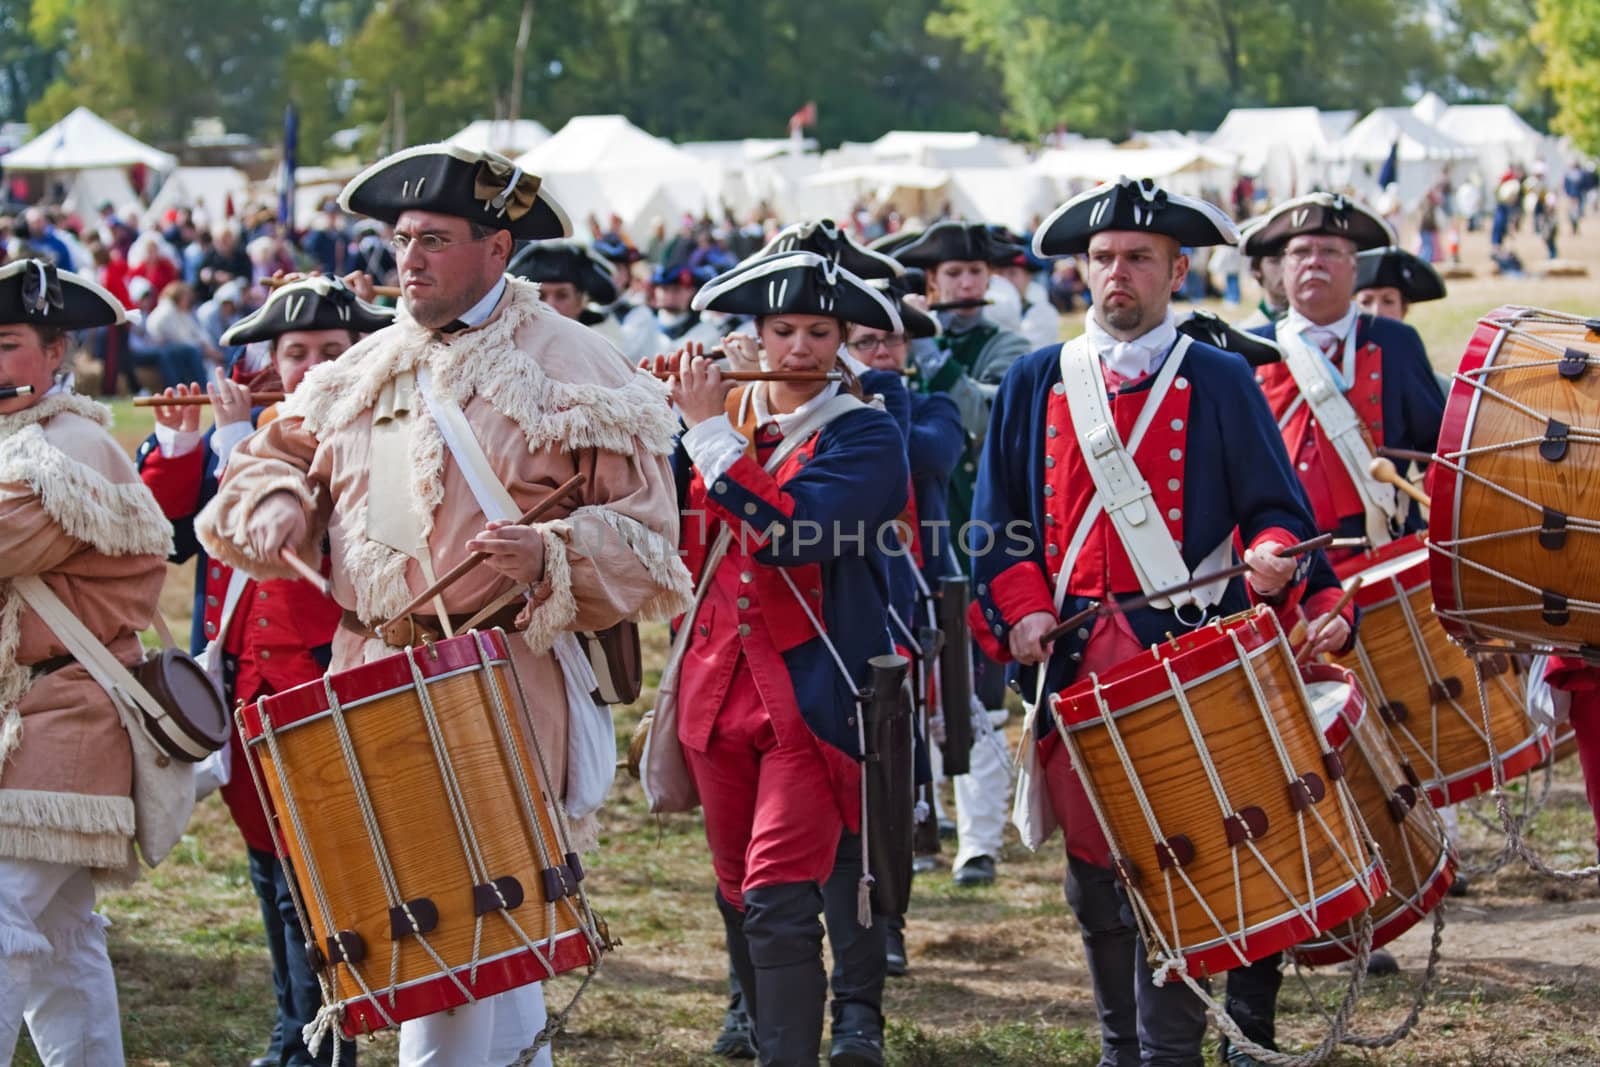 Fifers and drummers at the Feast of the Hunter's Moon by sgoodwin4813